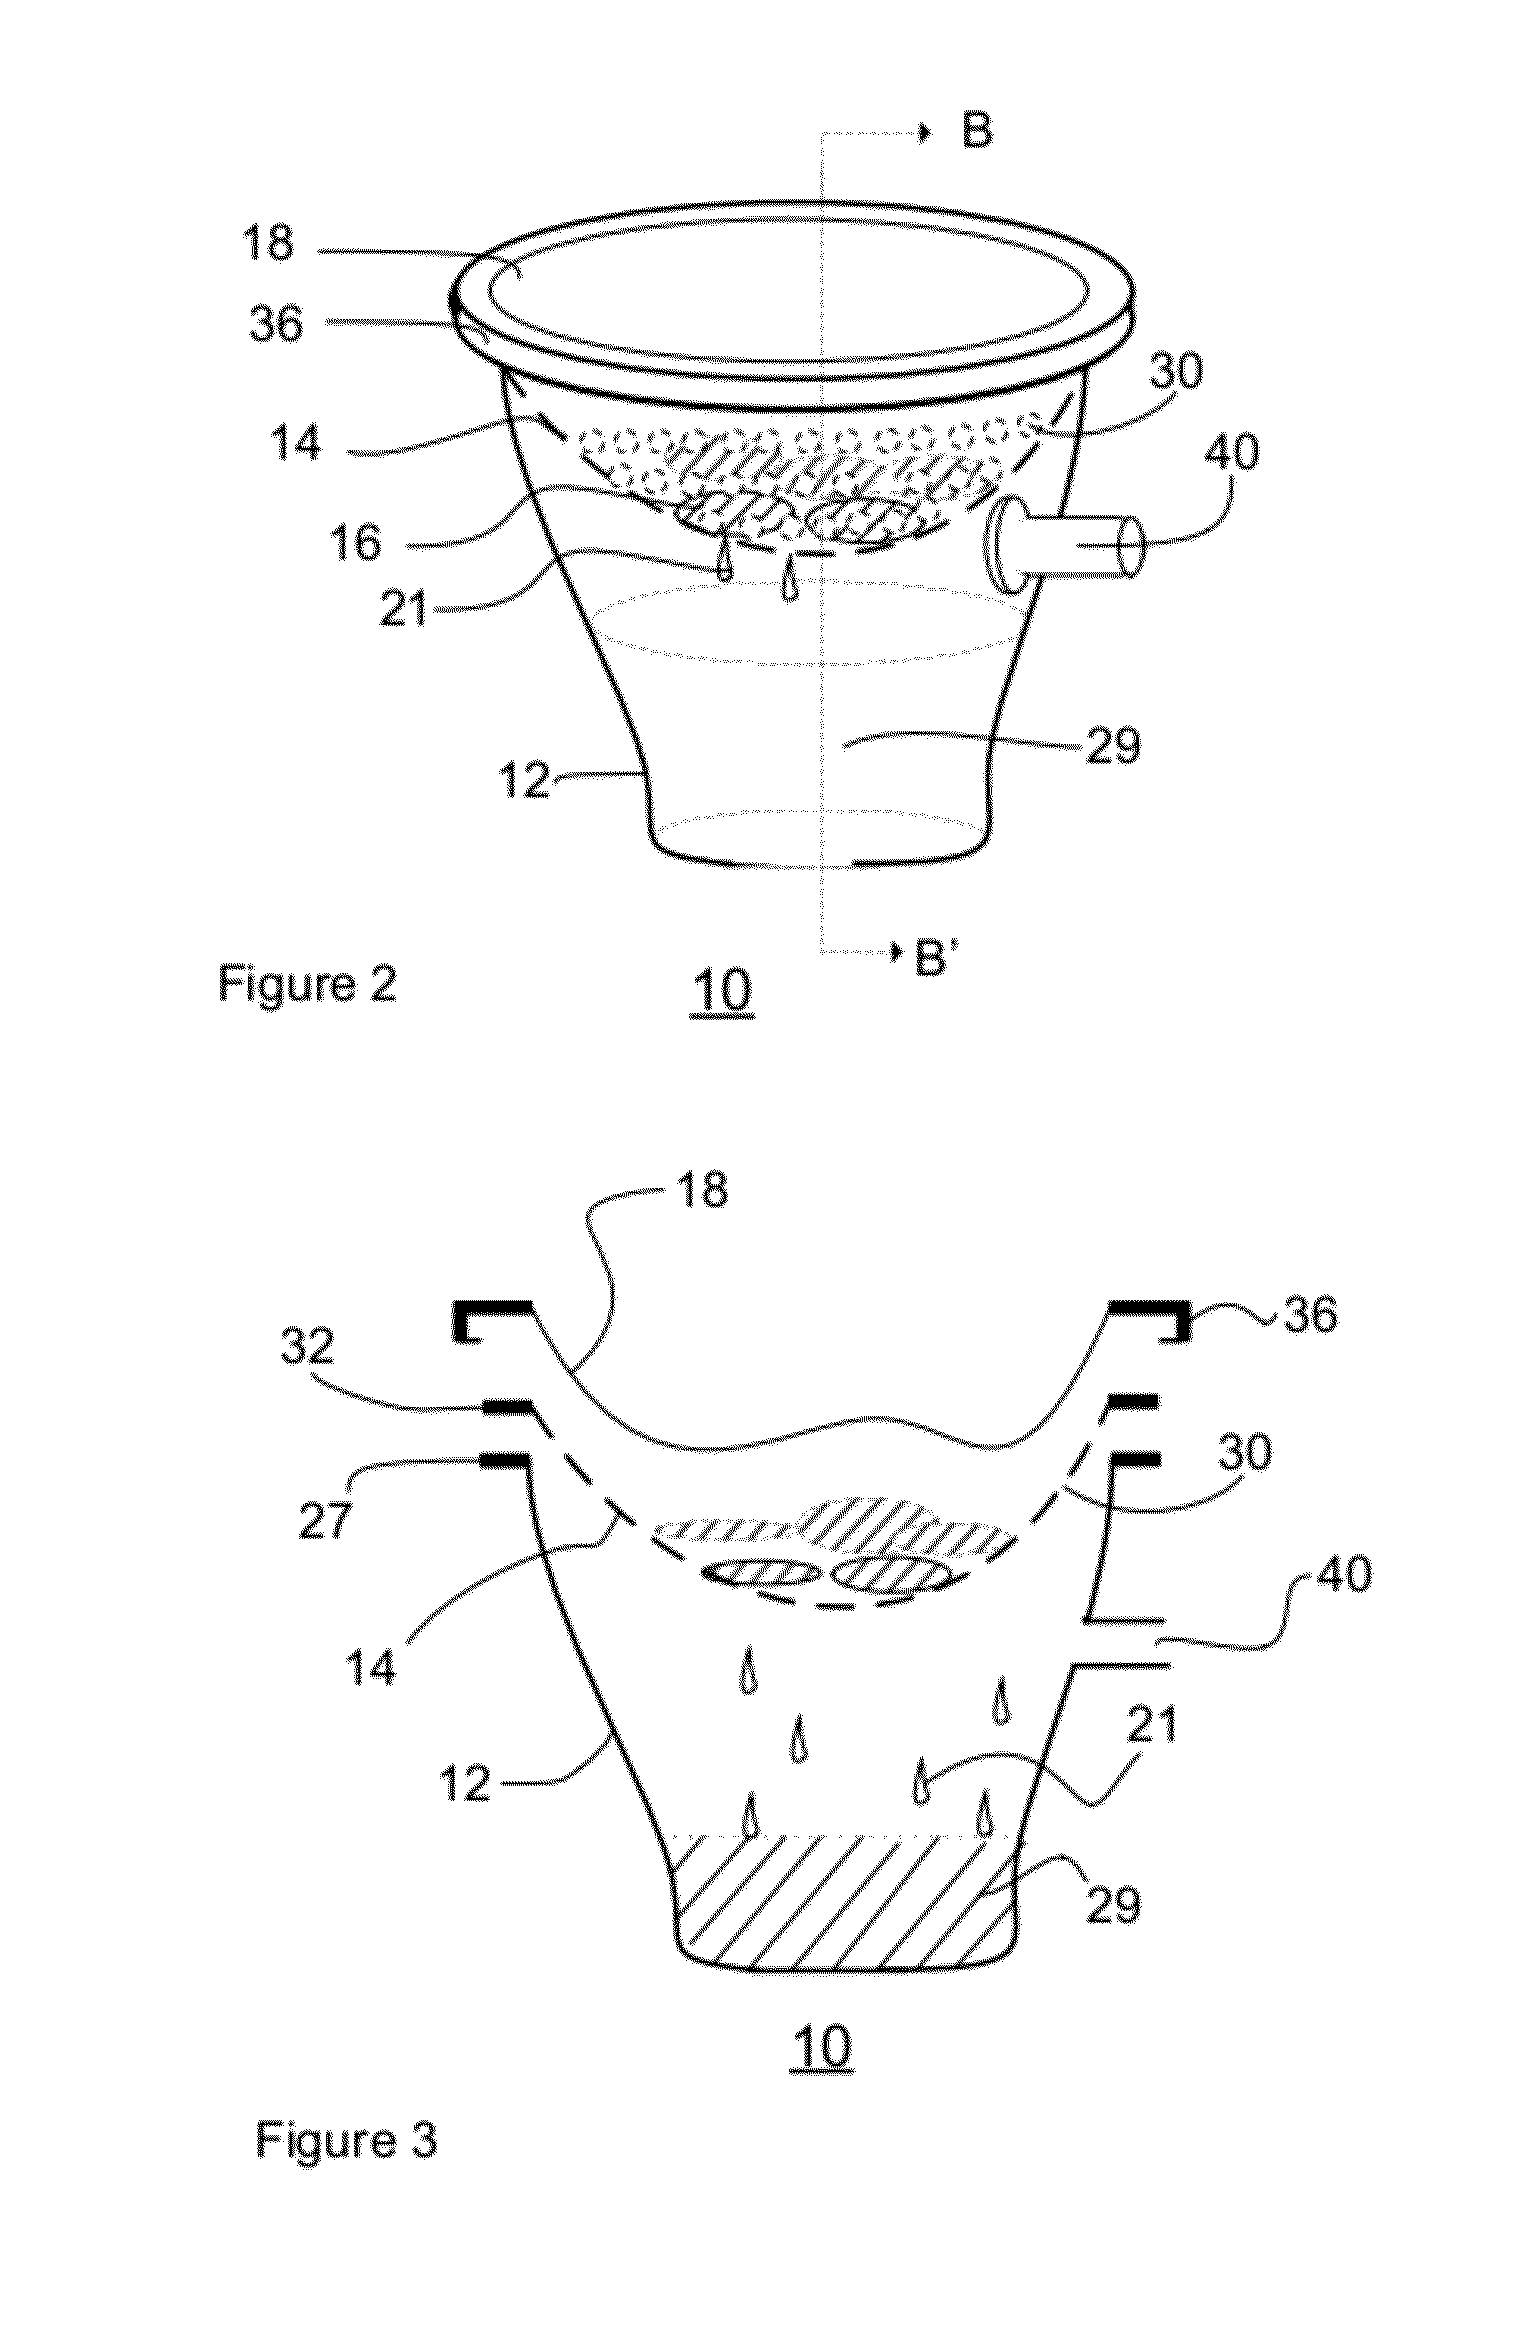 Intra-operative blood recovery system